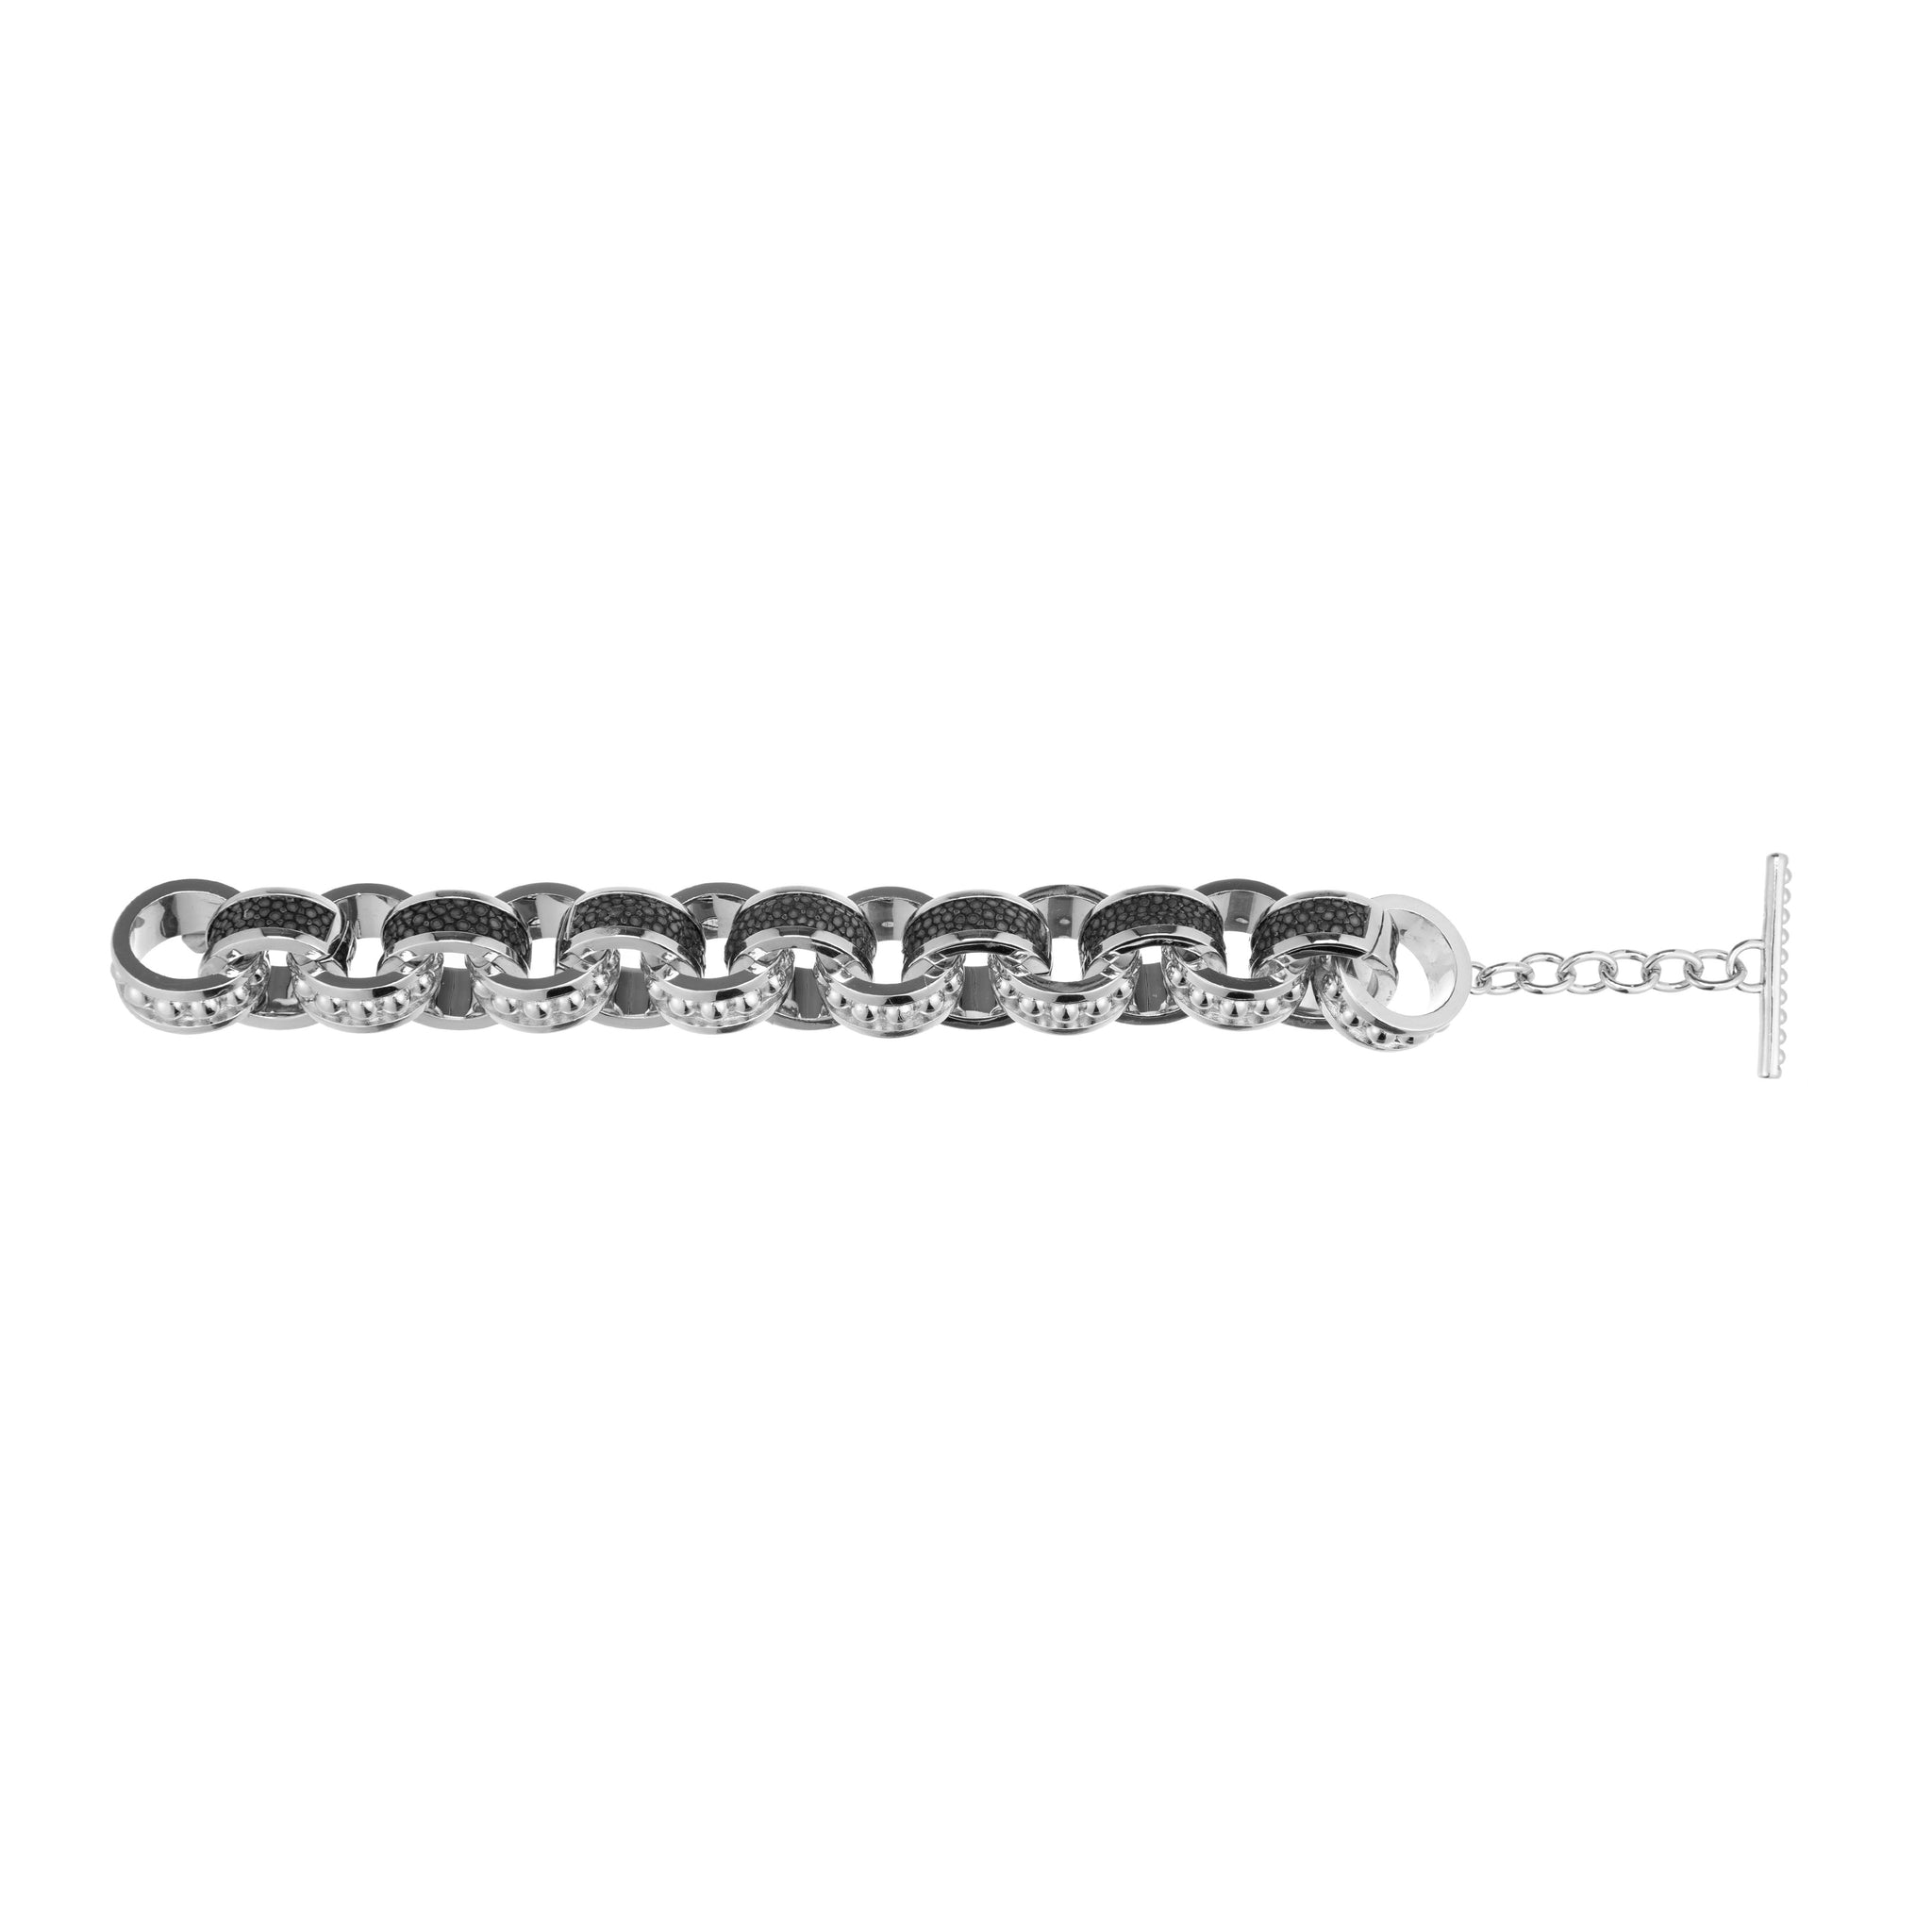 Lola Beaded White Gold Link Bracelet With Shagreen Inlay